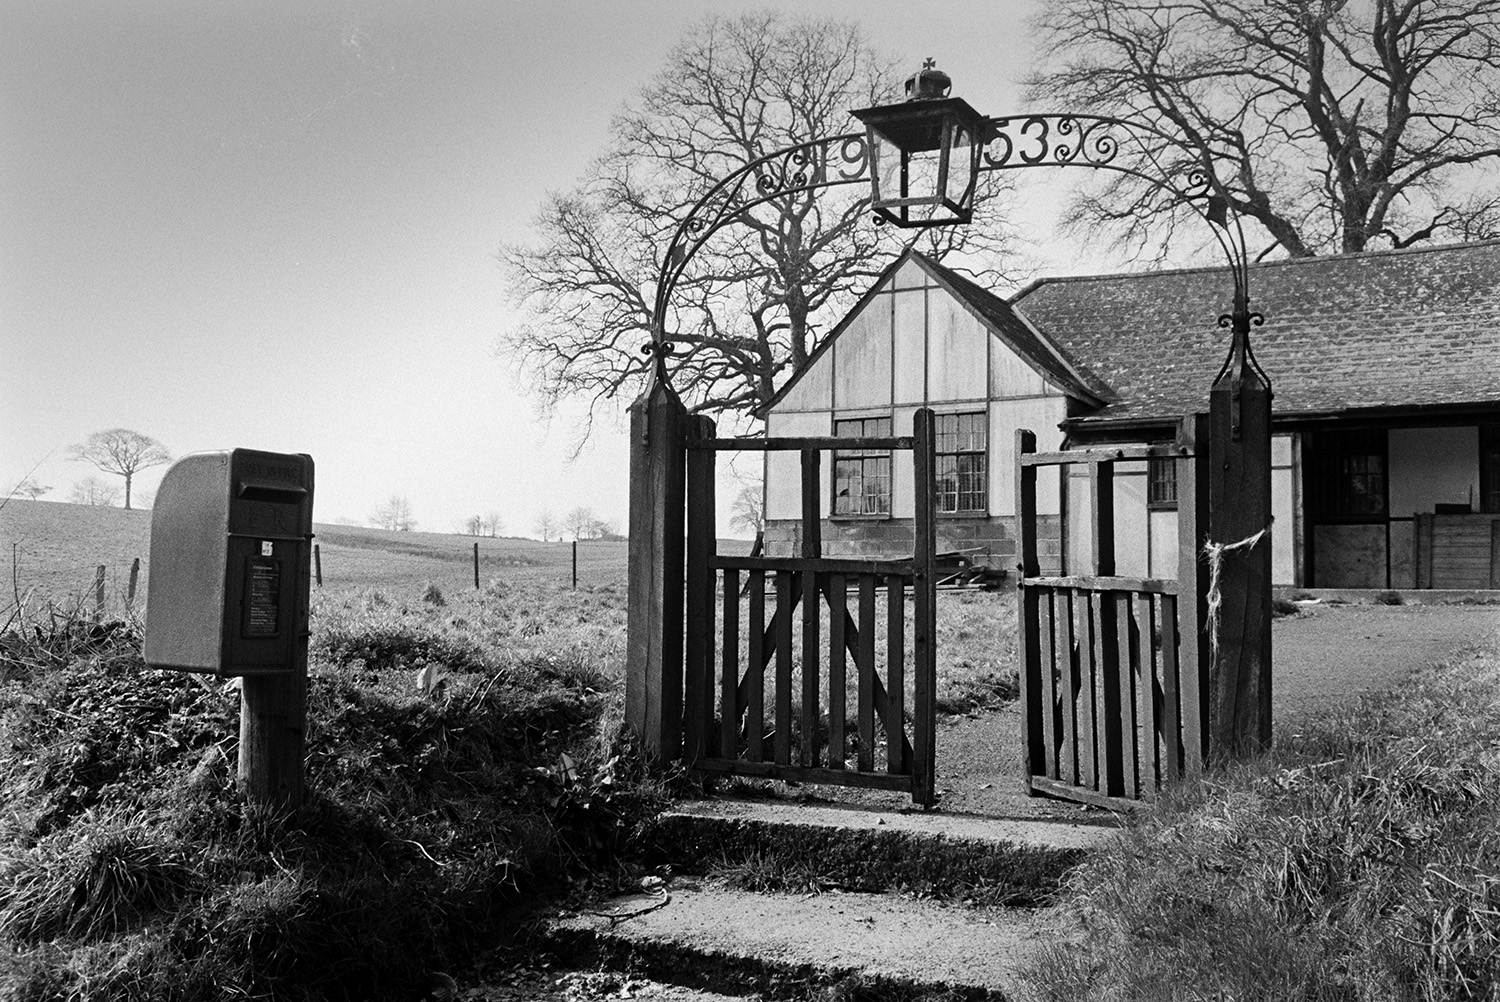 A bungalow with wooden gate, lamp and post box at its entrance, possibly in Witheridge. The date 1953 is worked into to design of the ironwork above the gate.